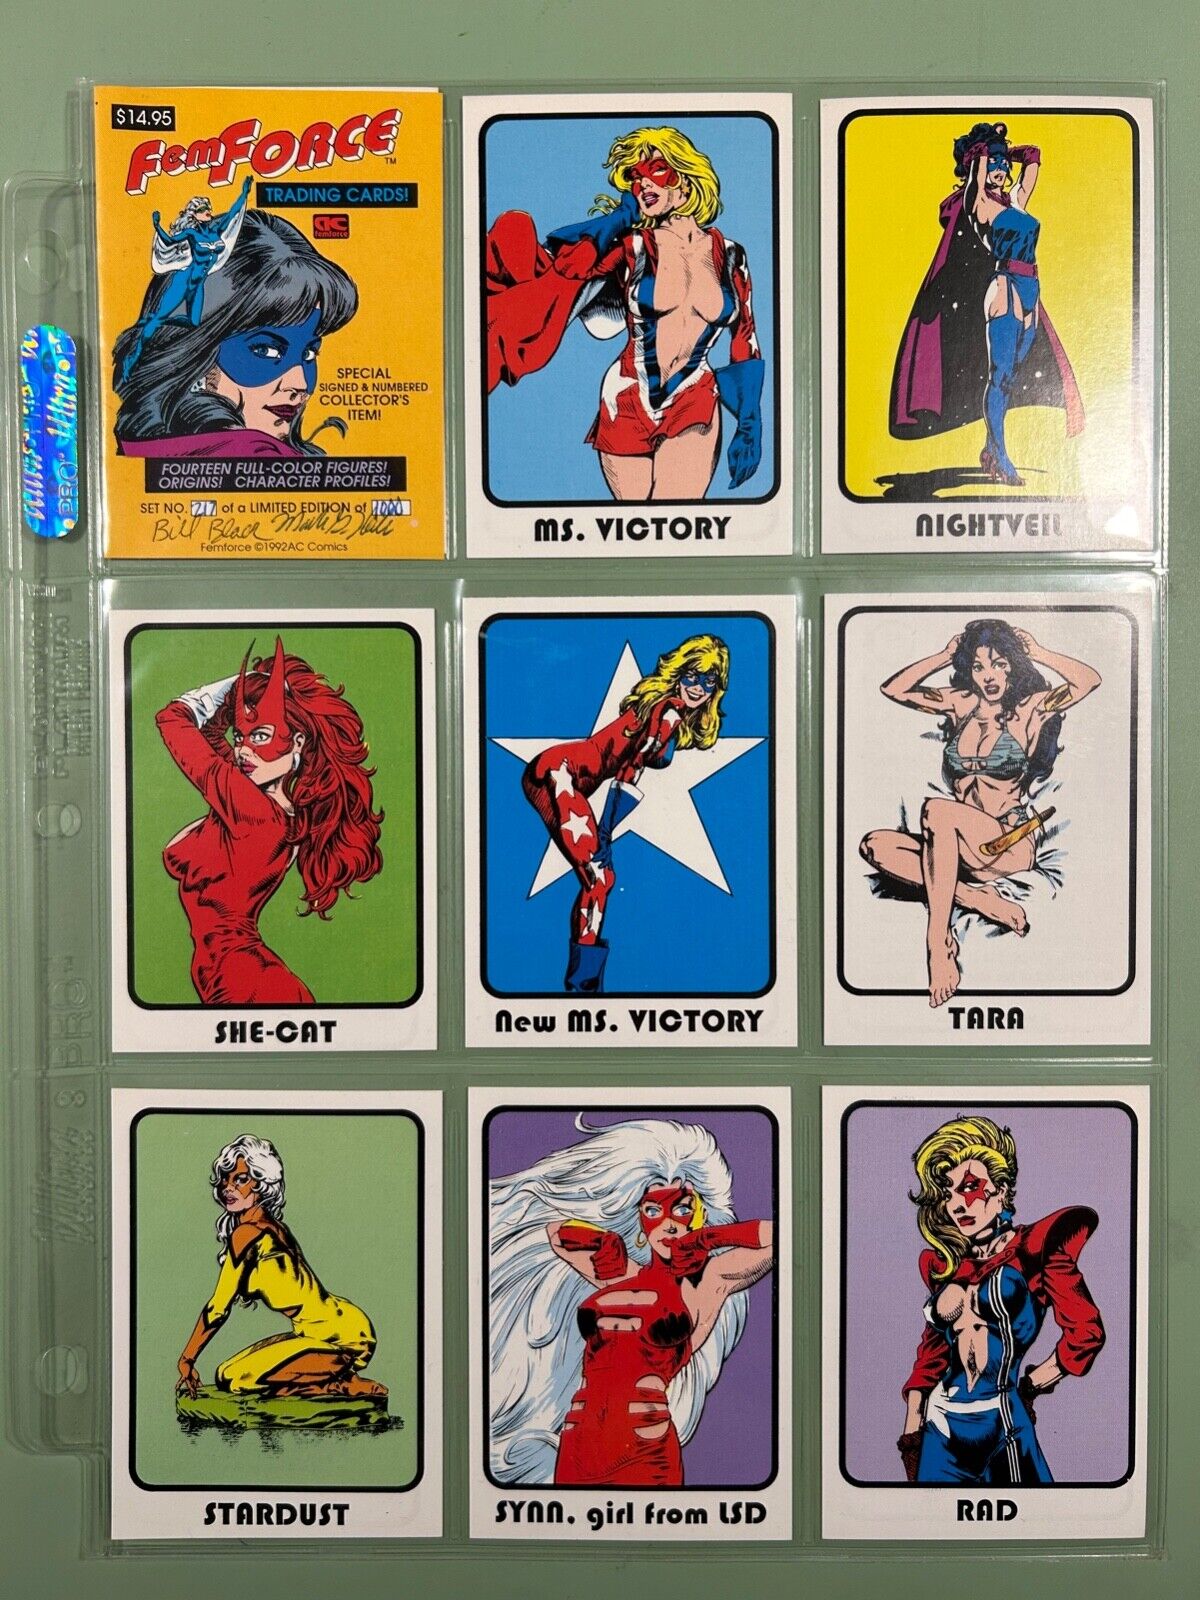 1991 AC Comics Femforce Trading Cards Sets 1,2,3 w/ Token, Sticker, Signed Cover